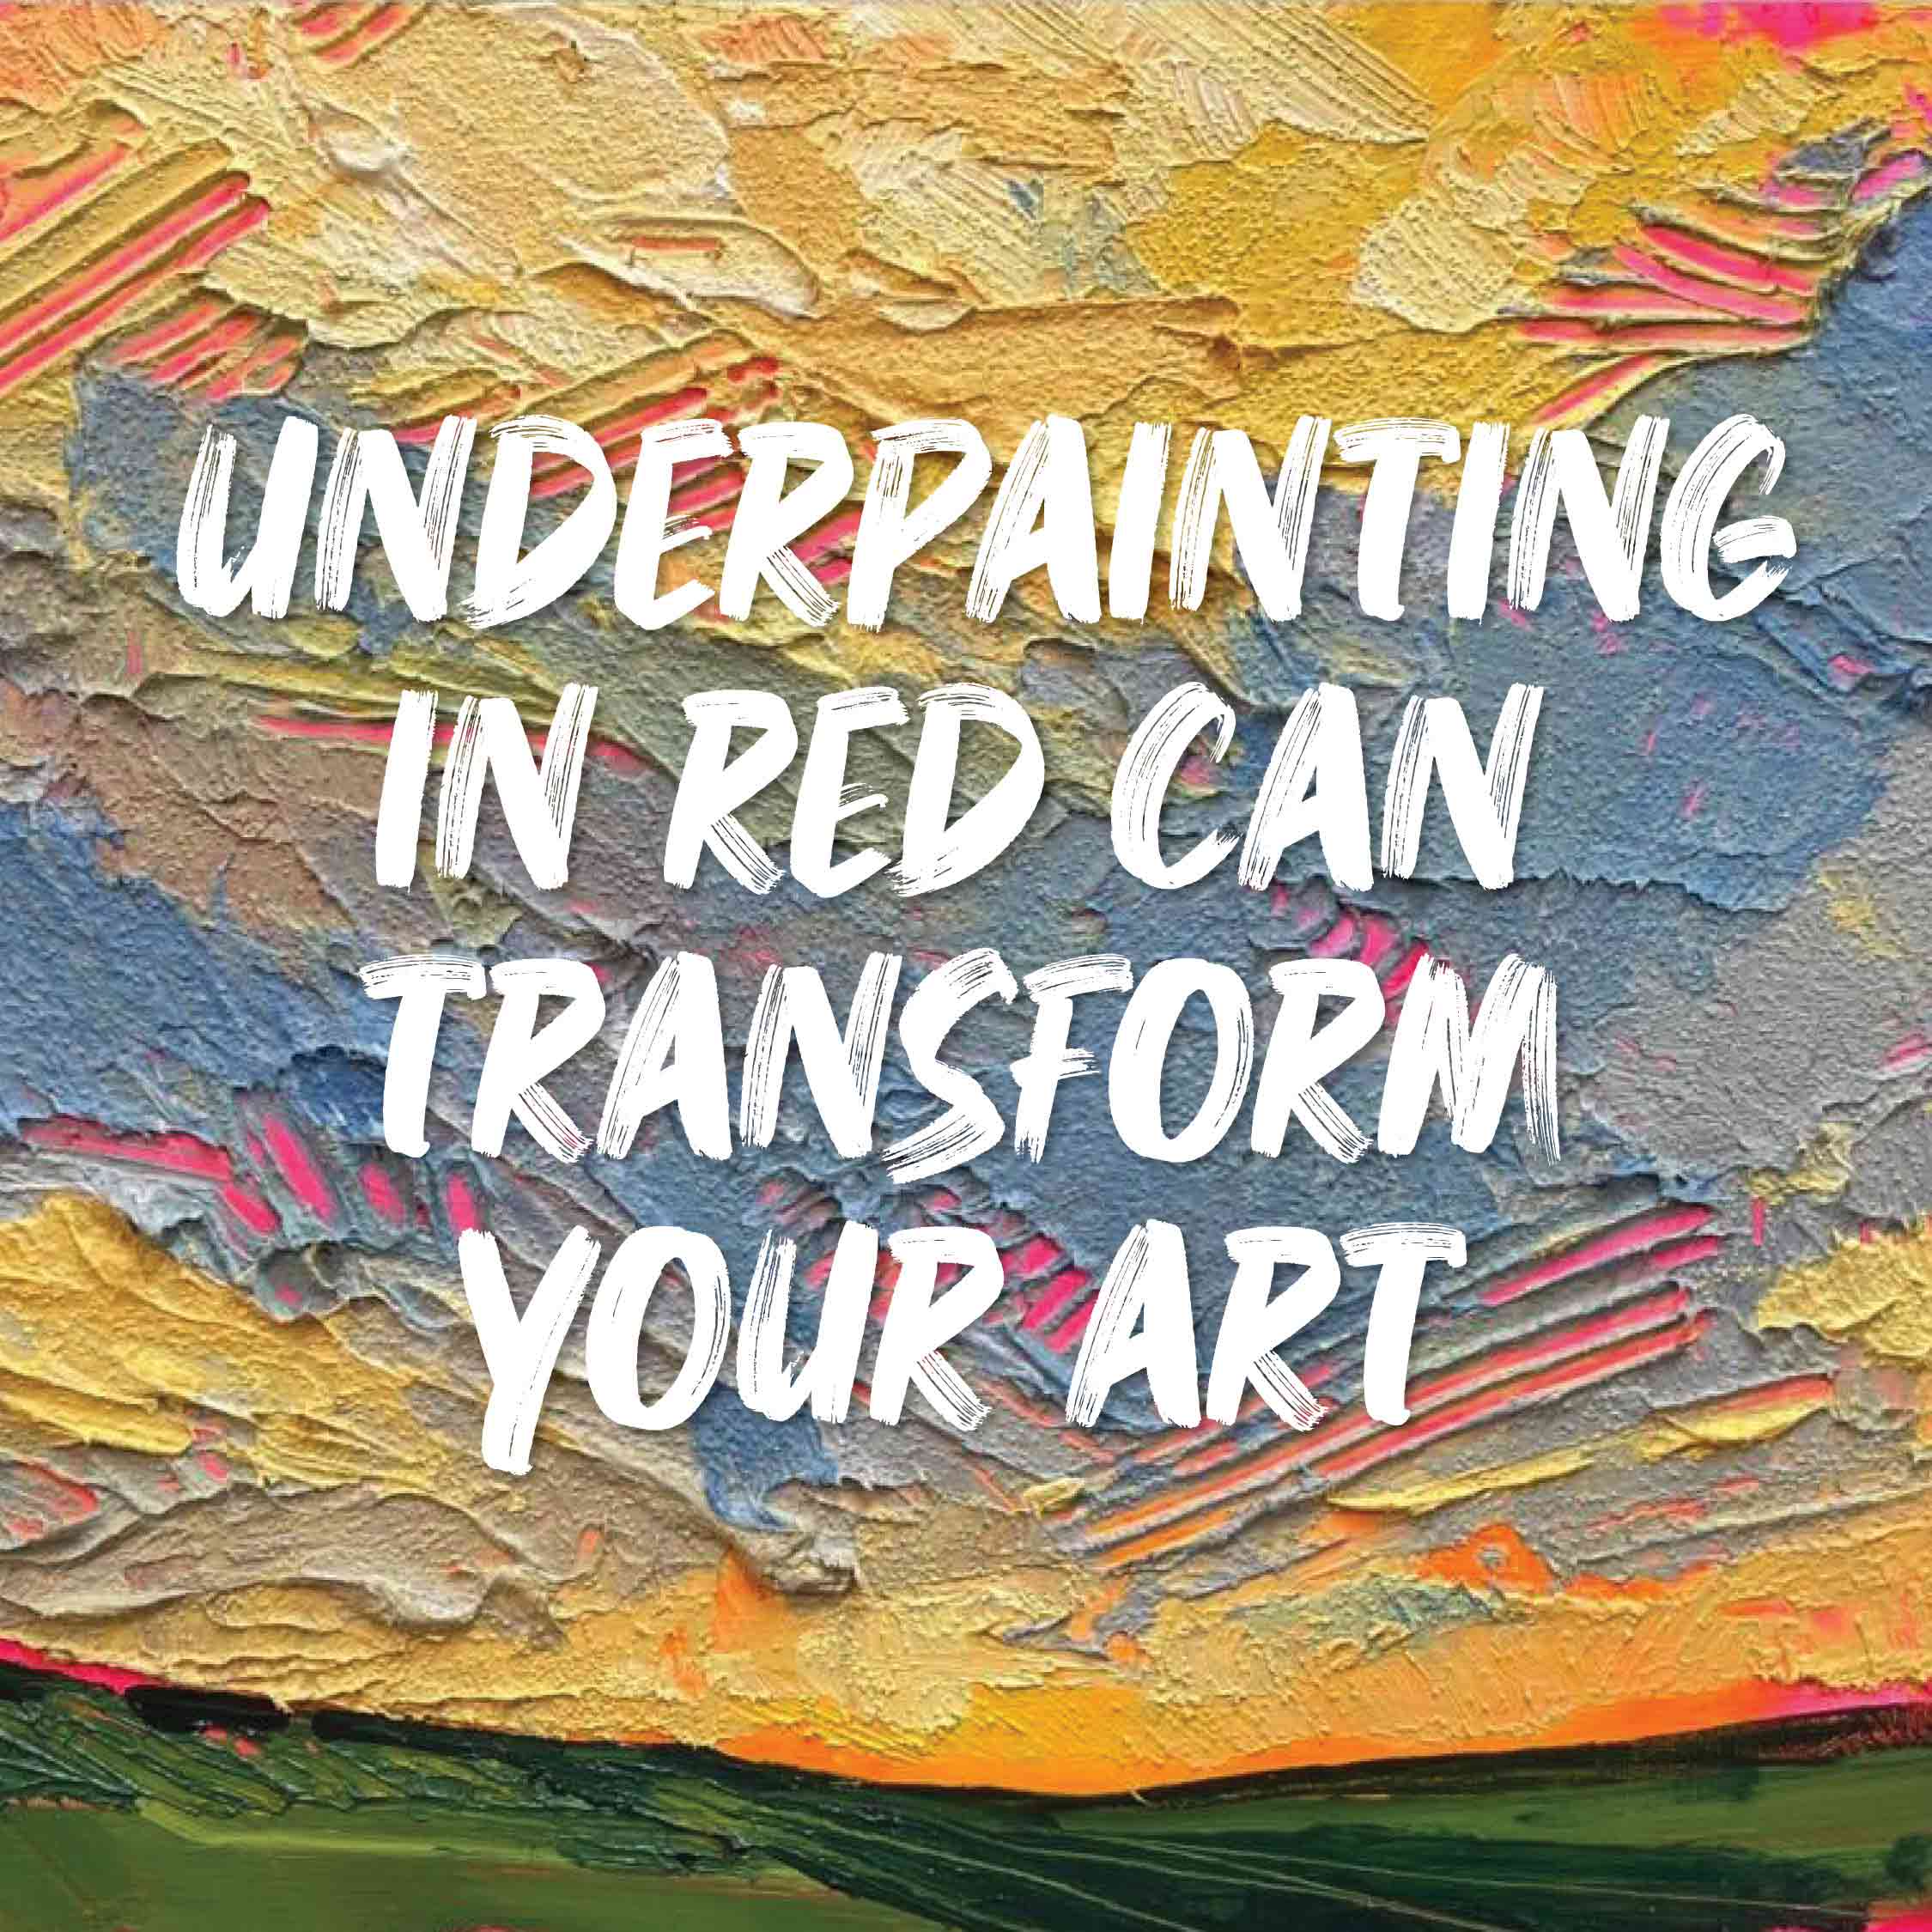 How Underpainting in Red Can Transform Your Art